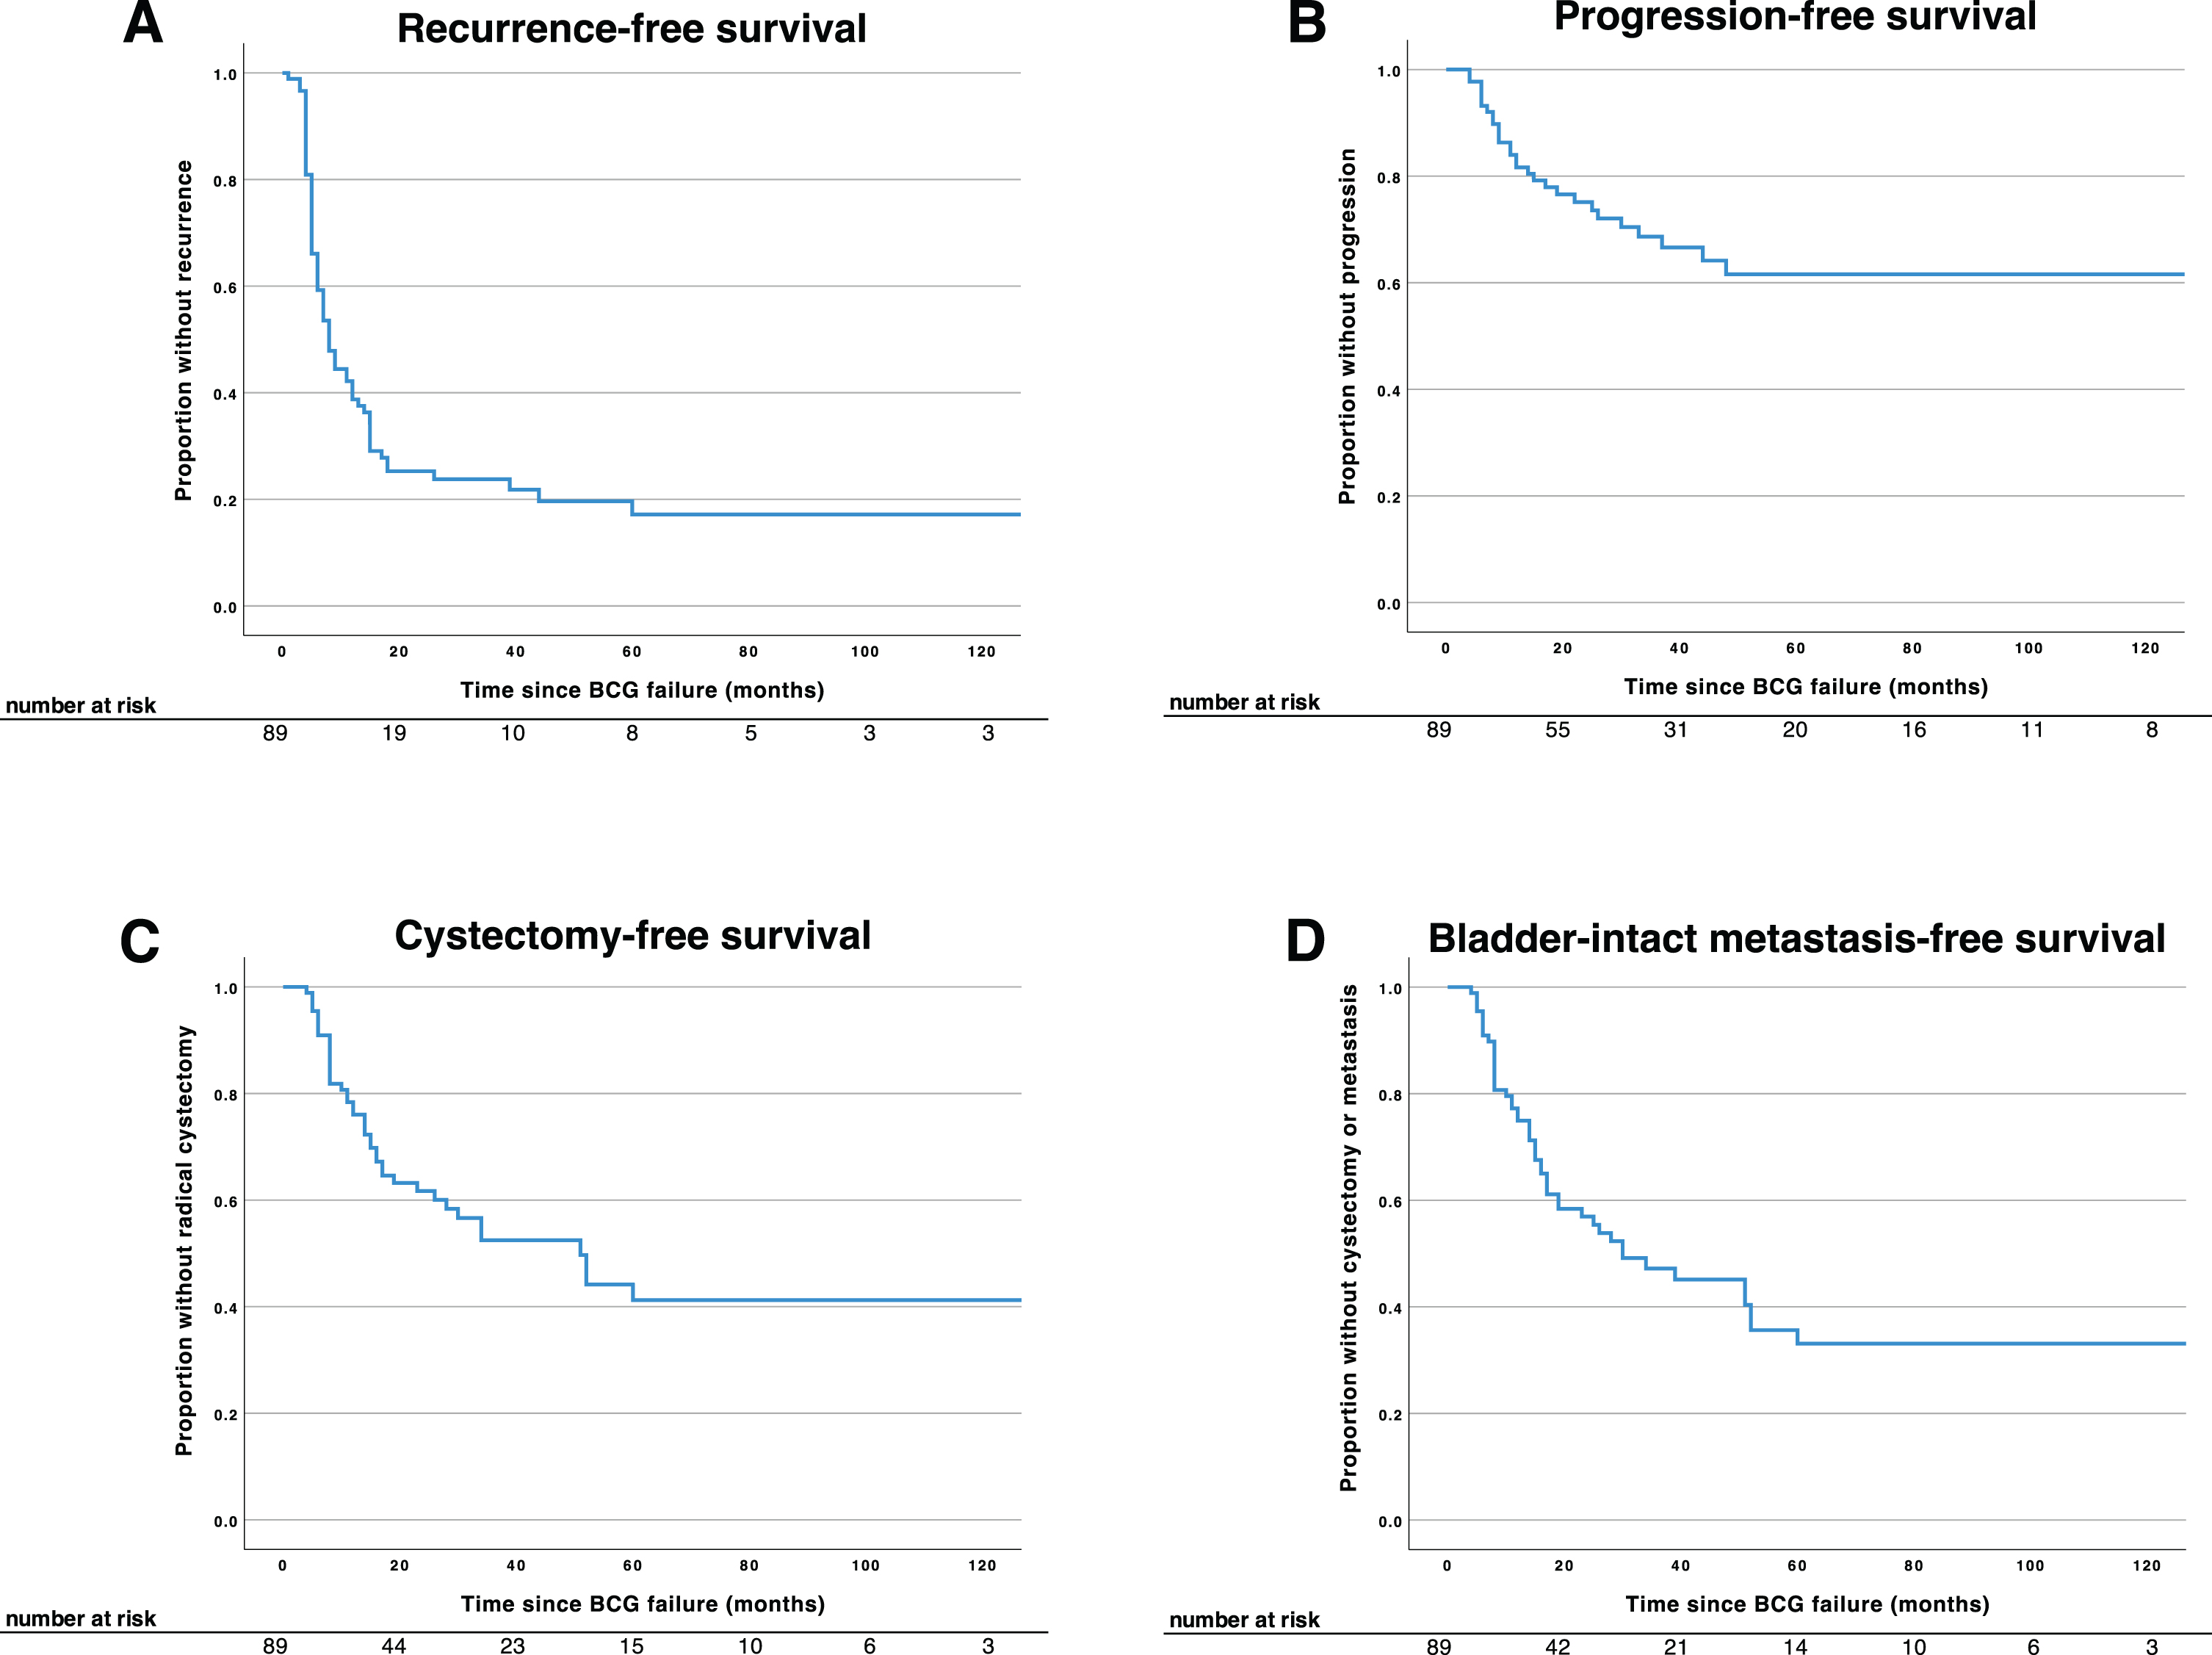 Oncologic outcomes of patients undergoing bladder-sparing treatment for BCG-unresponsive NMIBC. Kaplan-Meier curves showing recurrence-free (A), progression-free (B), cystectomy-free (C), and bladder-intact metastasis-free survival (D) of patients opting for initial bladder-sparing management of BCG-unresponsive NMIBC. Recurrence-free survival was a composite of high-grade intravesical and systemic recurrence. Progression-free survival was a composite of muscle-invasive (≥T2) and metastatic (nodal/distant) progression. A large majority of patients experienced disease recurrence within the first two years, and over half underwent radical cystectomy within five years of initial BCG failure. Abbreviations: BCG, bacillus Calmette-Guérin; NMIBC, non-muscle invasive bladder cancer.